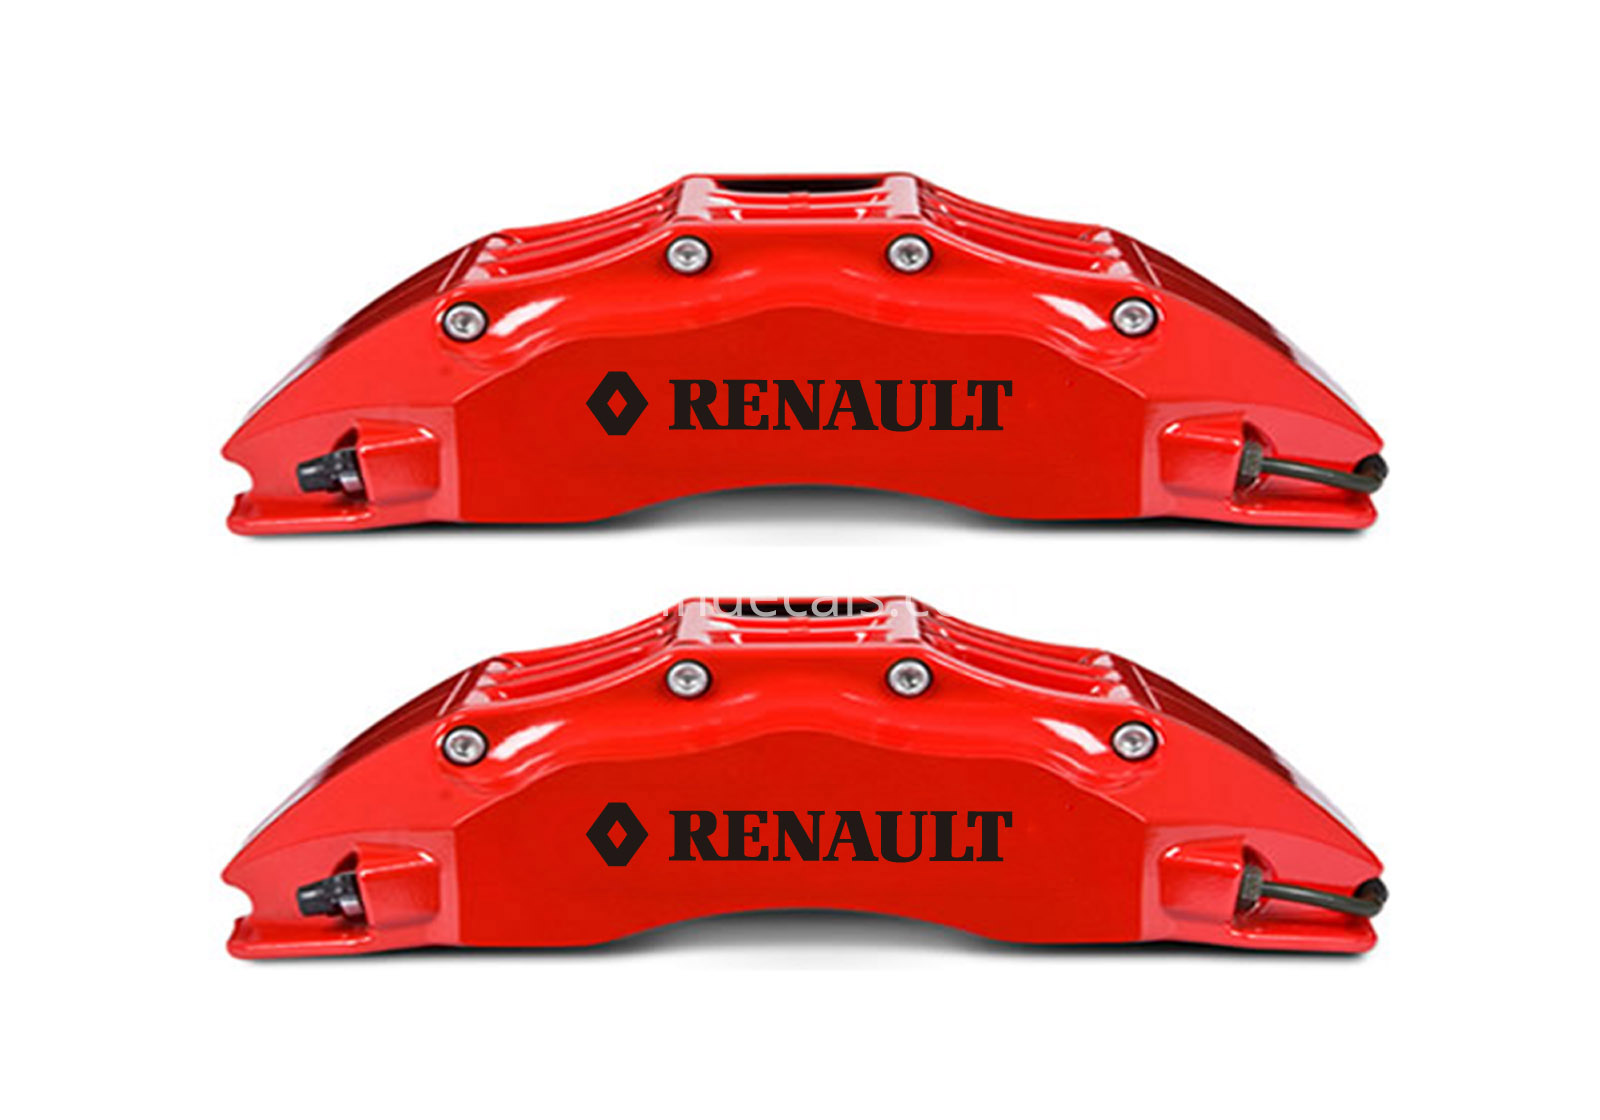 6 x Renault Stickers for Brakes - Black